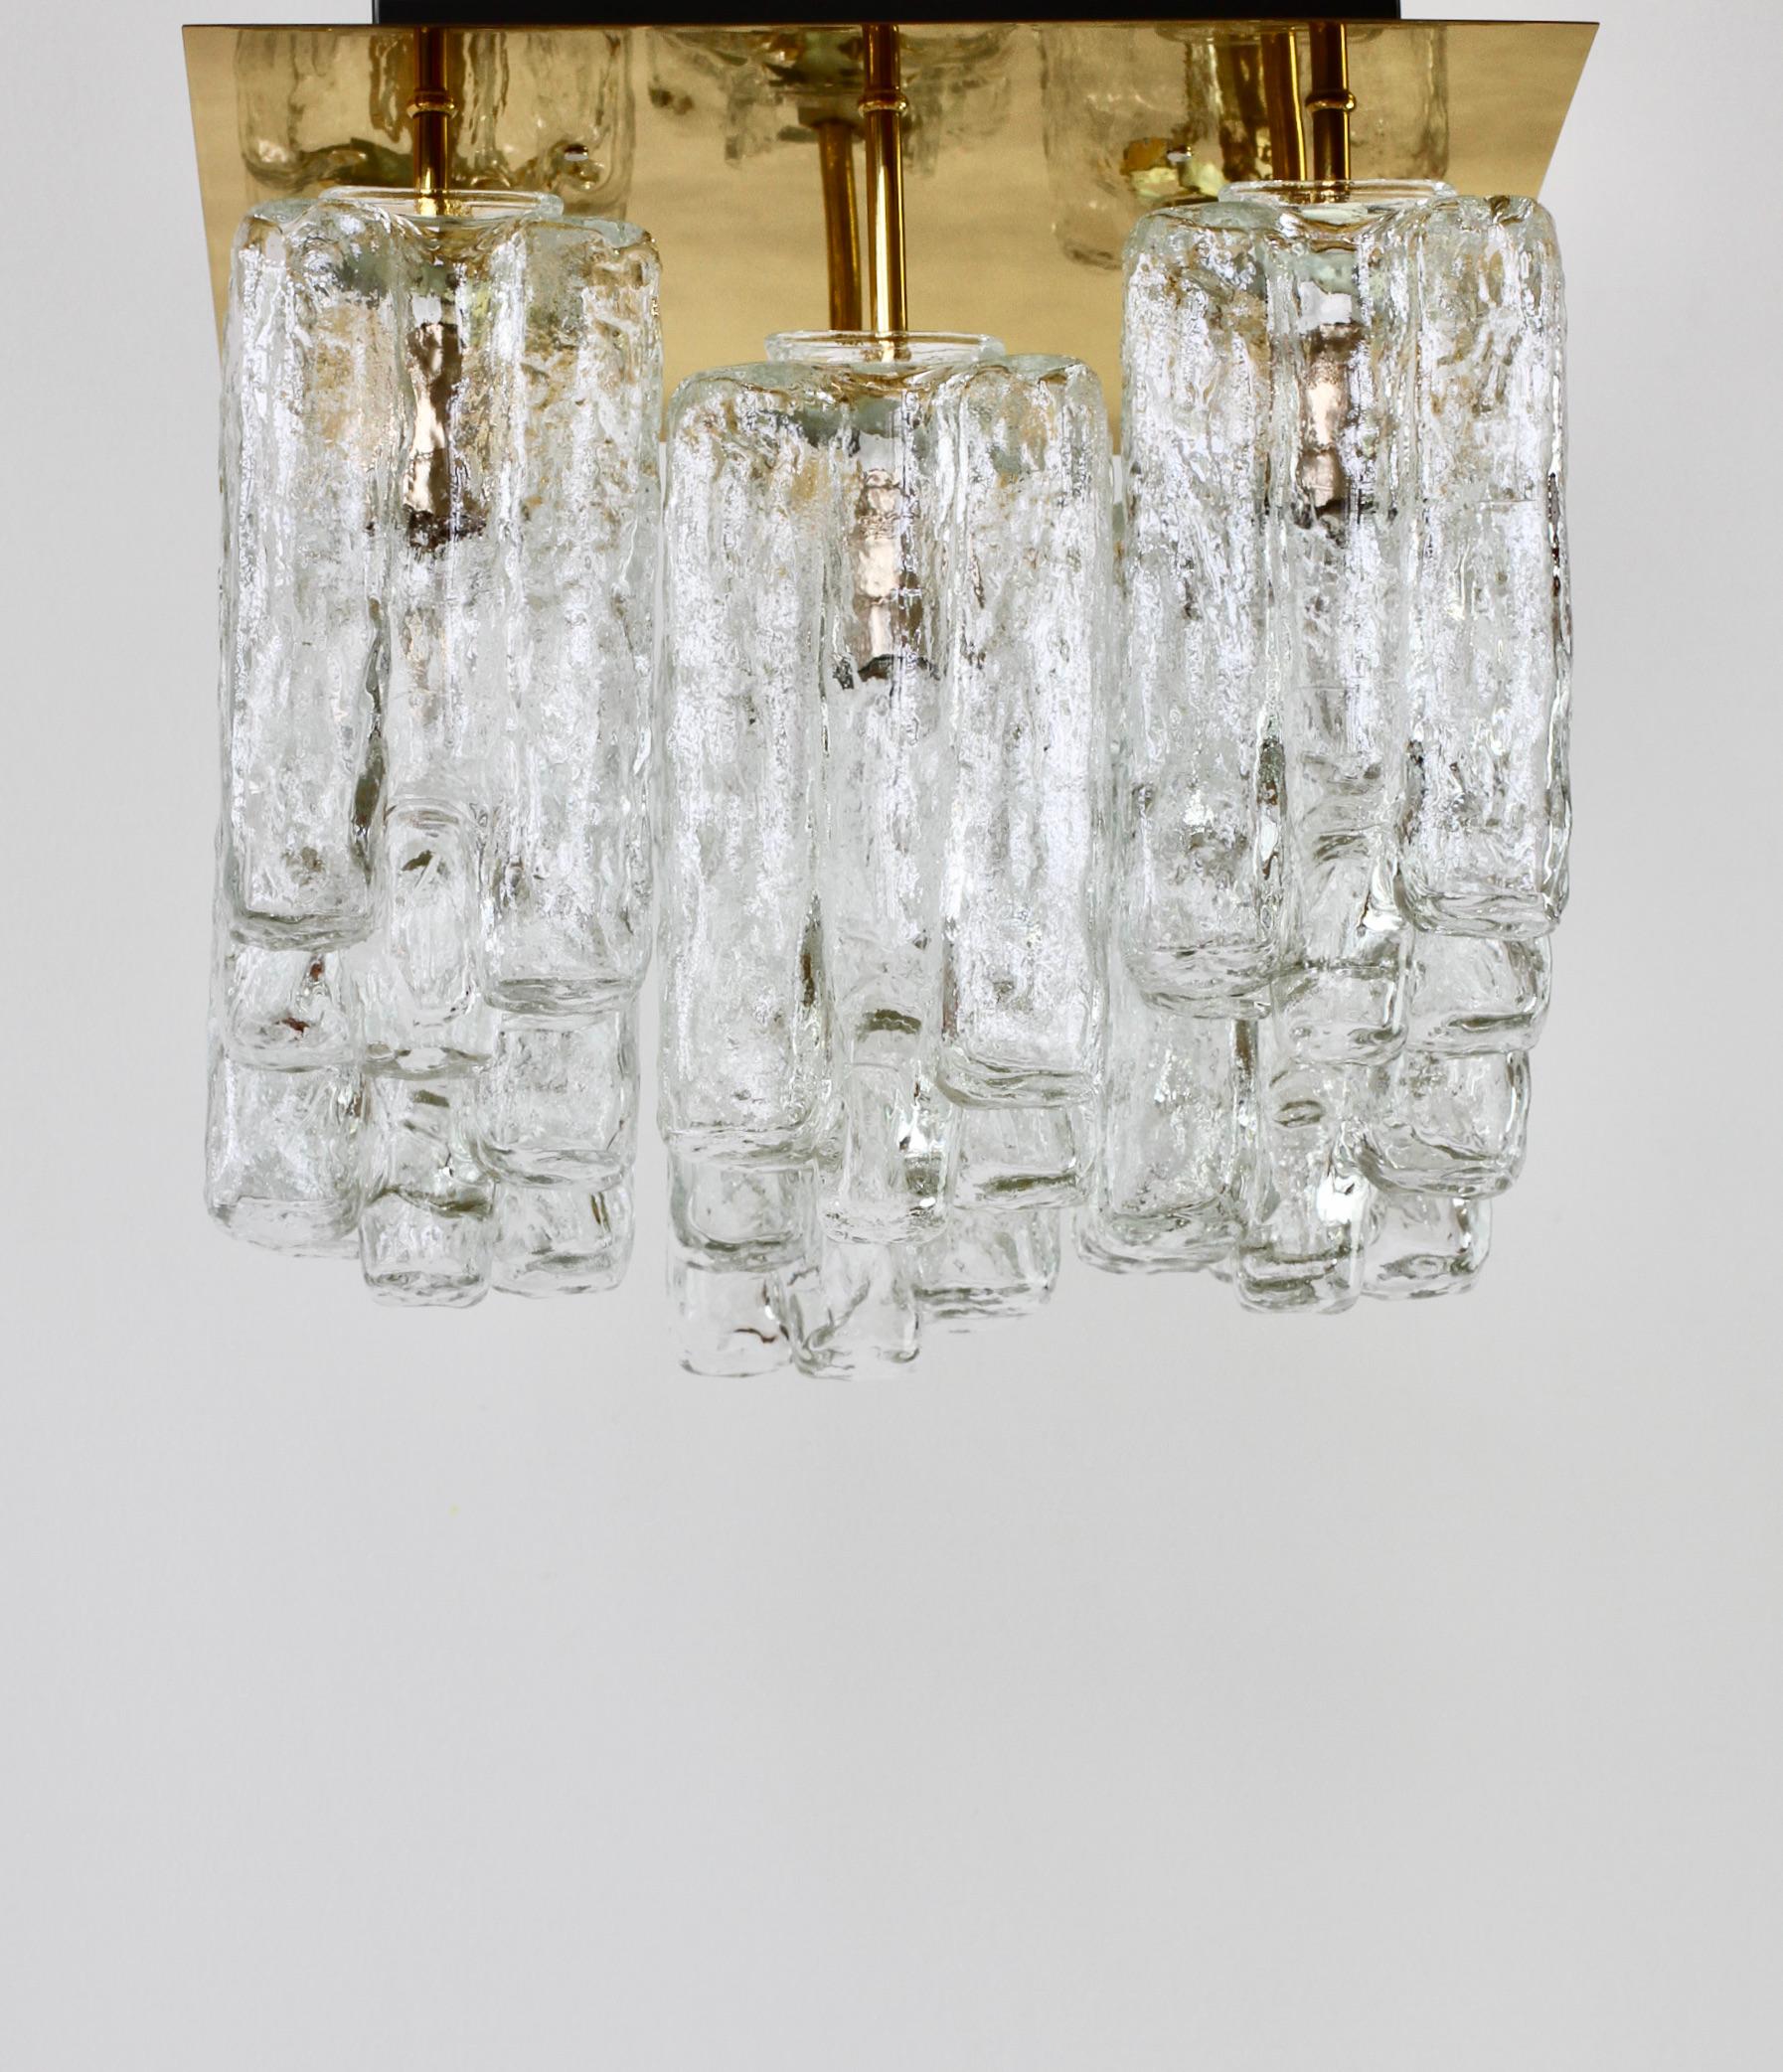 Austrian made rare large 'Granada' model with brass hardware and ice crystal glass flush mount chandelier by Kalmar, circa 1970. Featuring eight hanging glass elements resembling ice crystals suspended from a polished brass flushmount.

Perfect